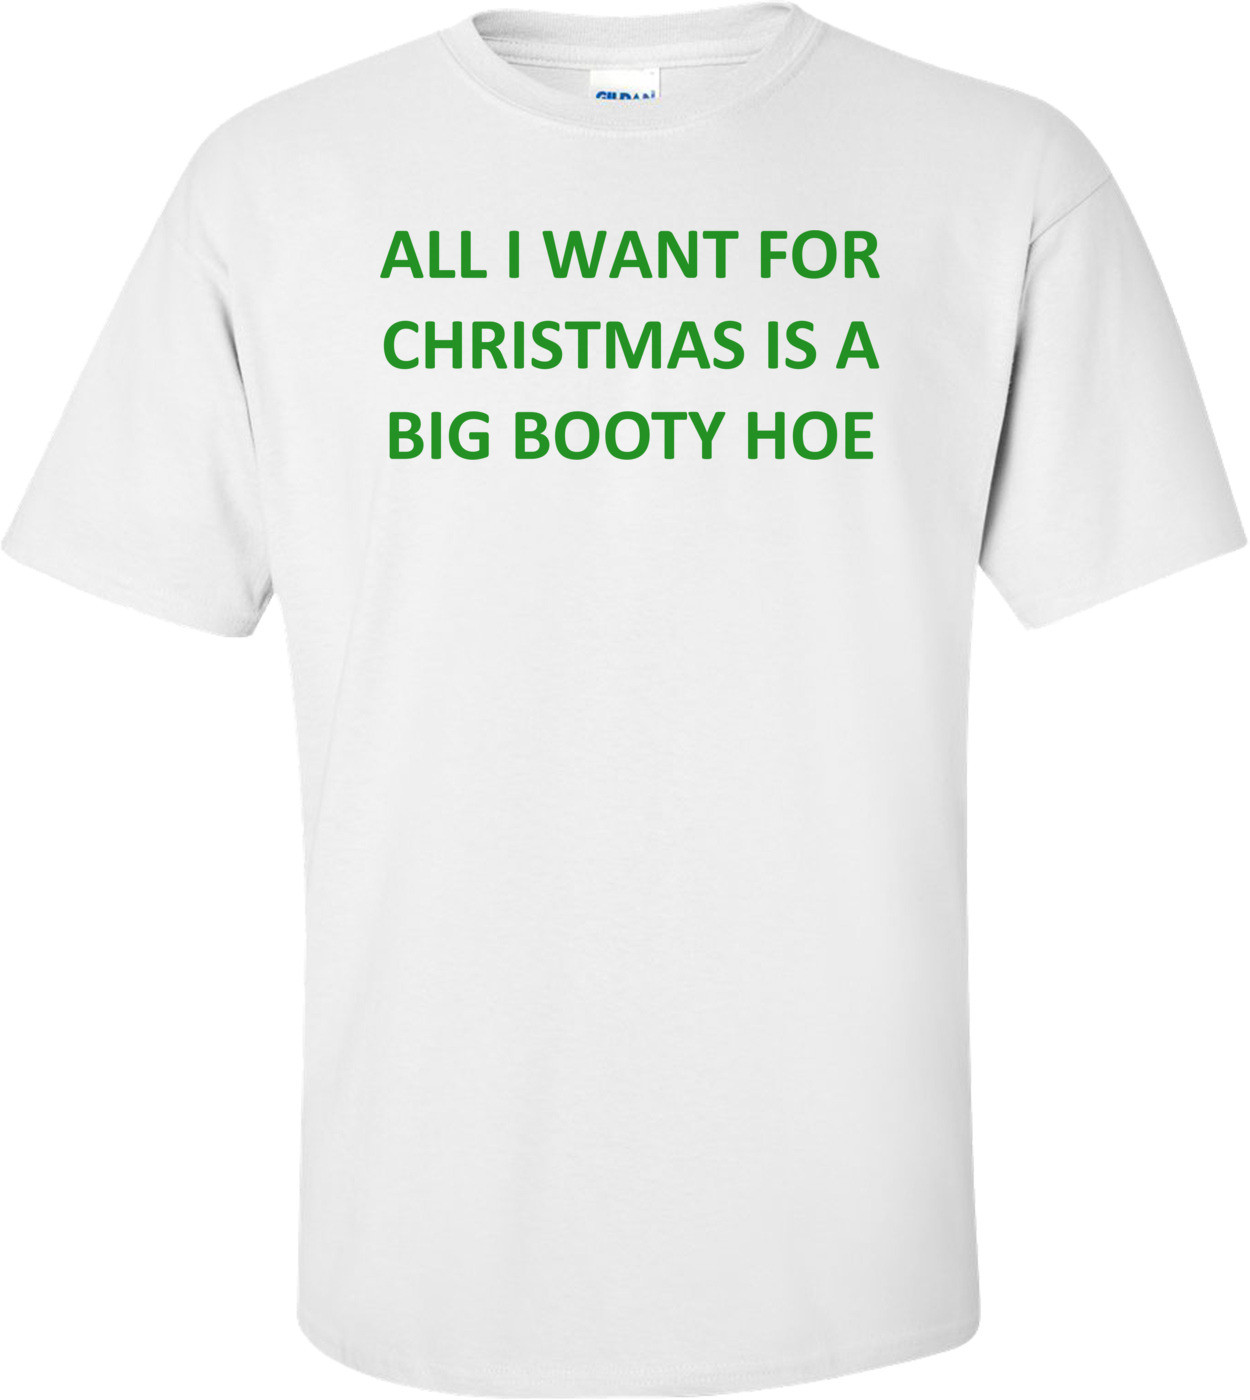 ALL I WANT FOR CHRISTMAS IS A BIG BOOTY HOE Shirt